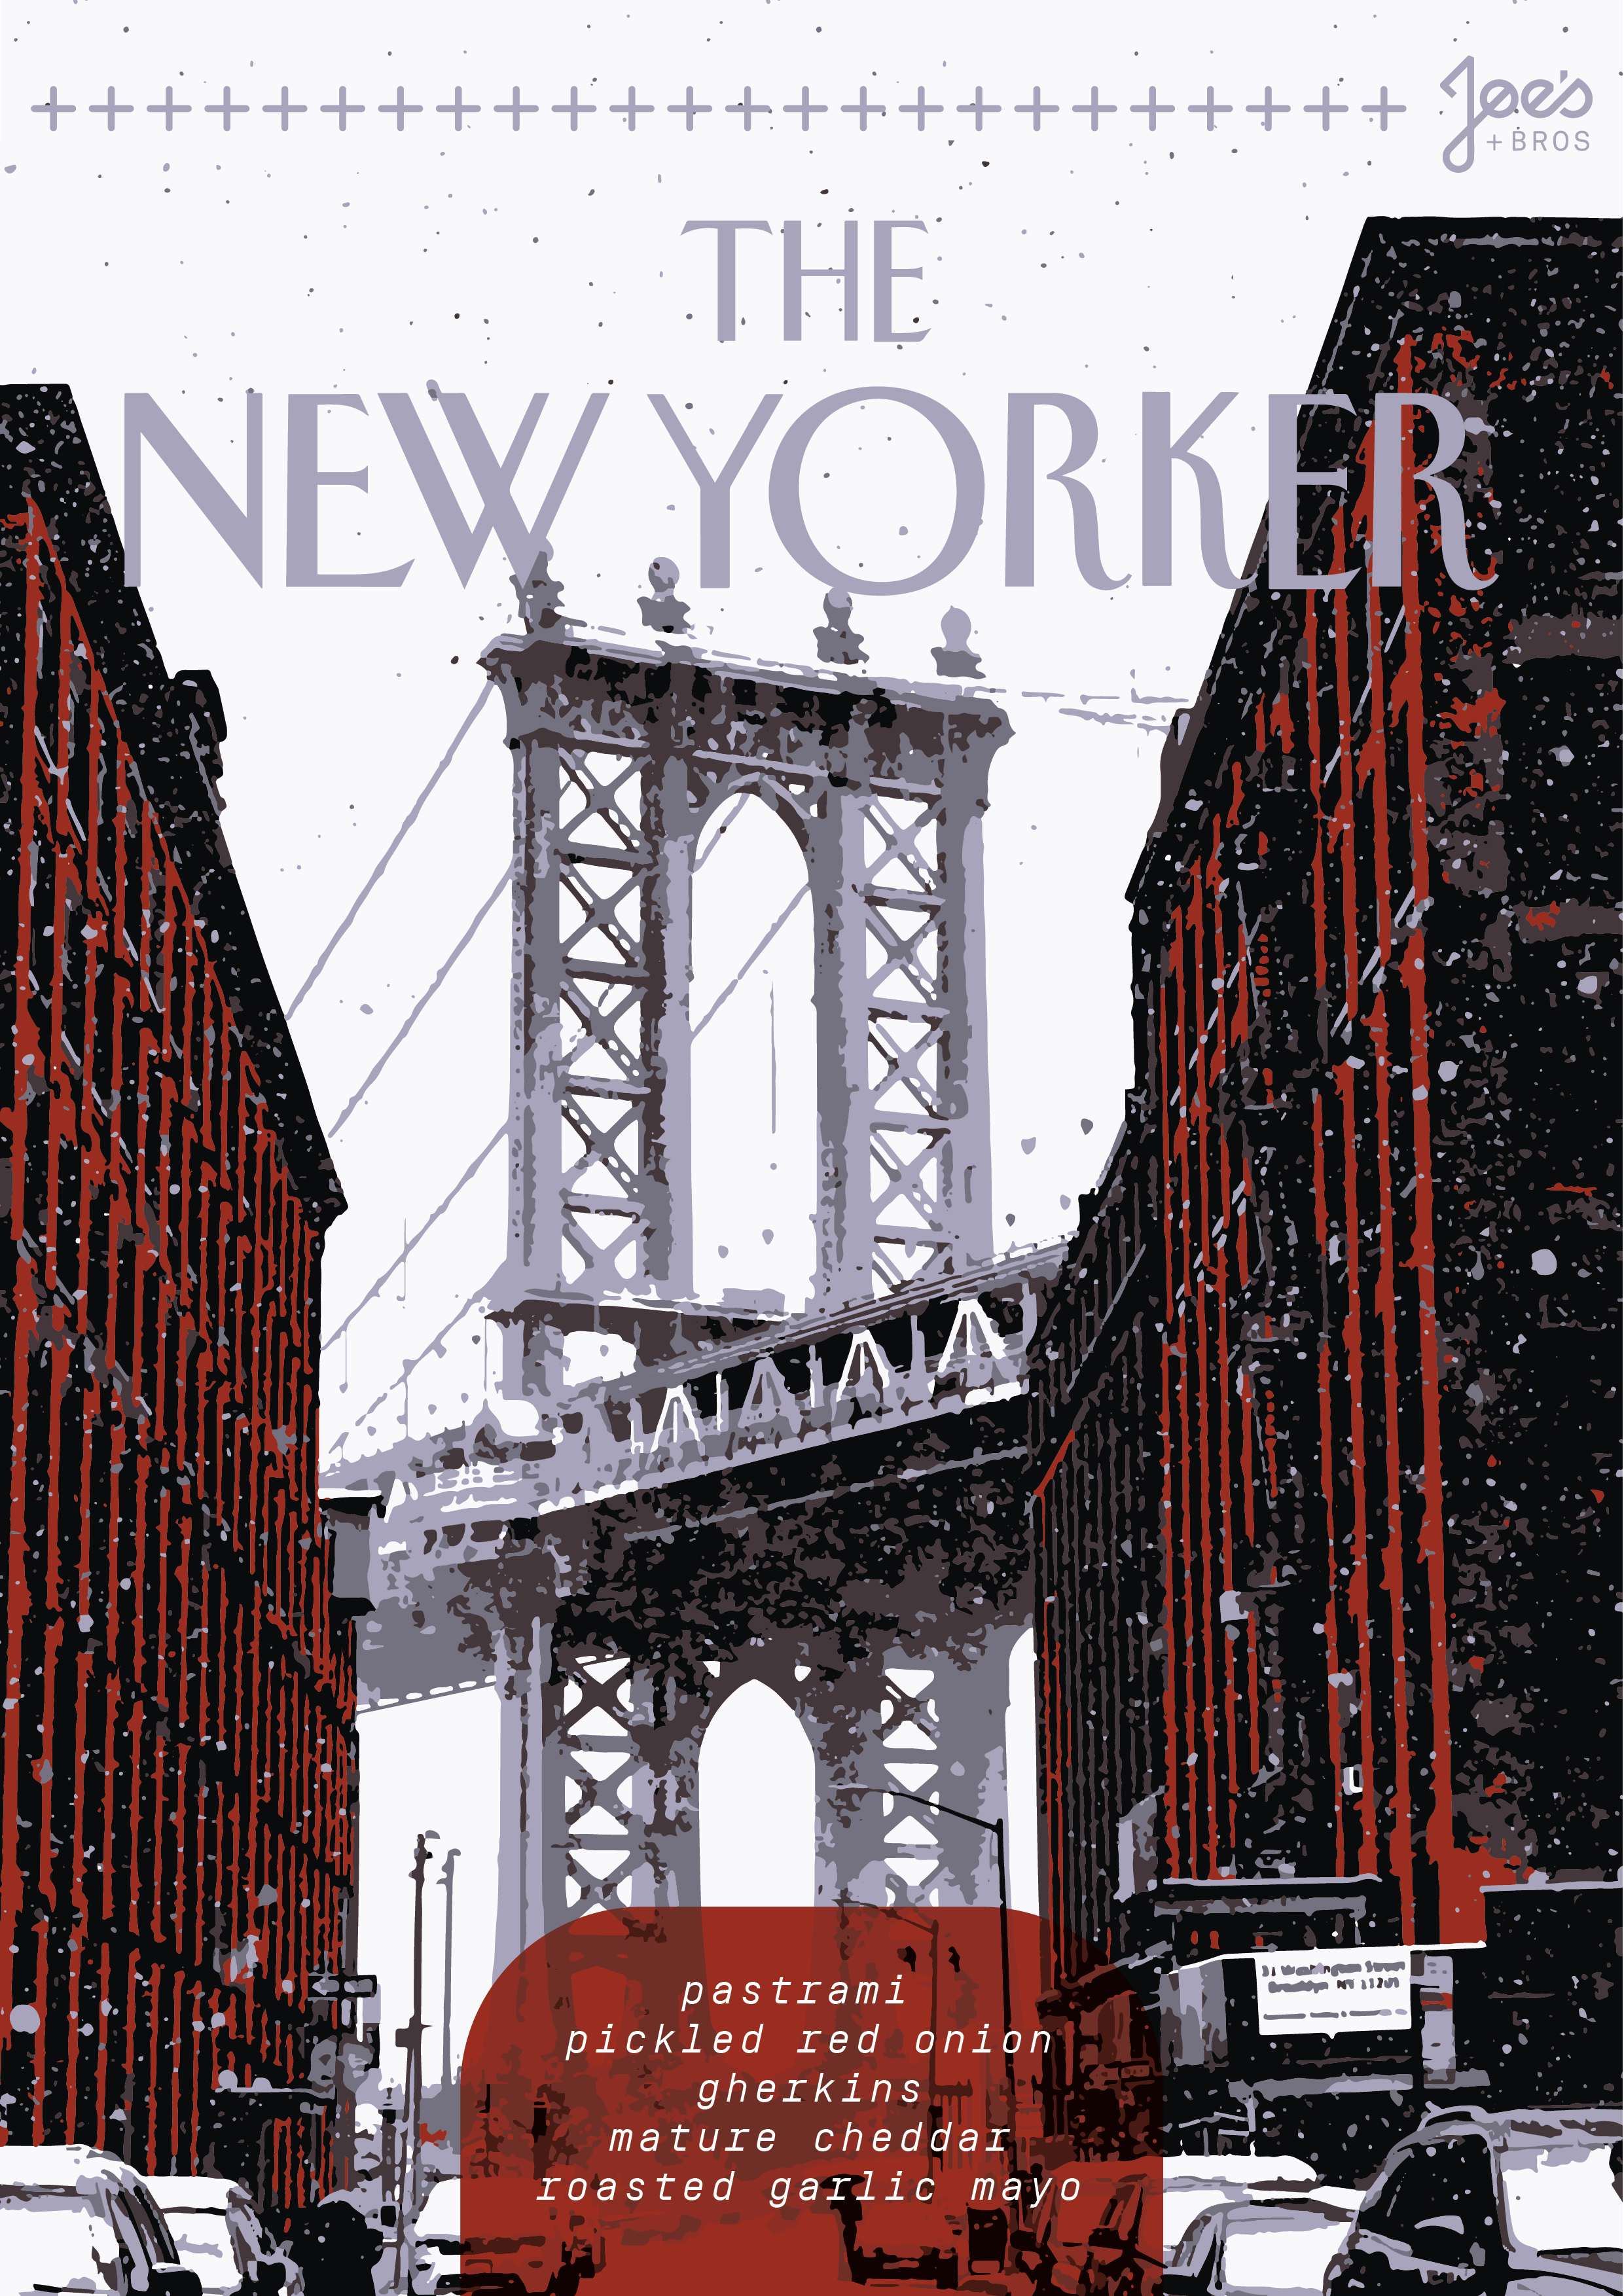 New Yorker A4 v01-01.png